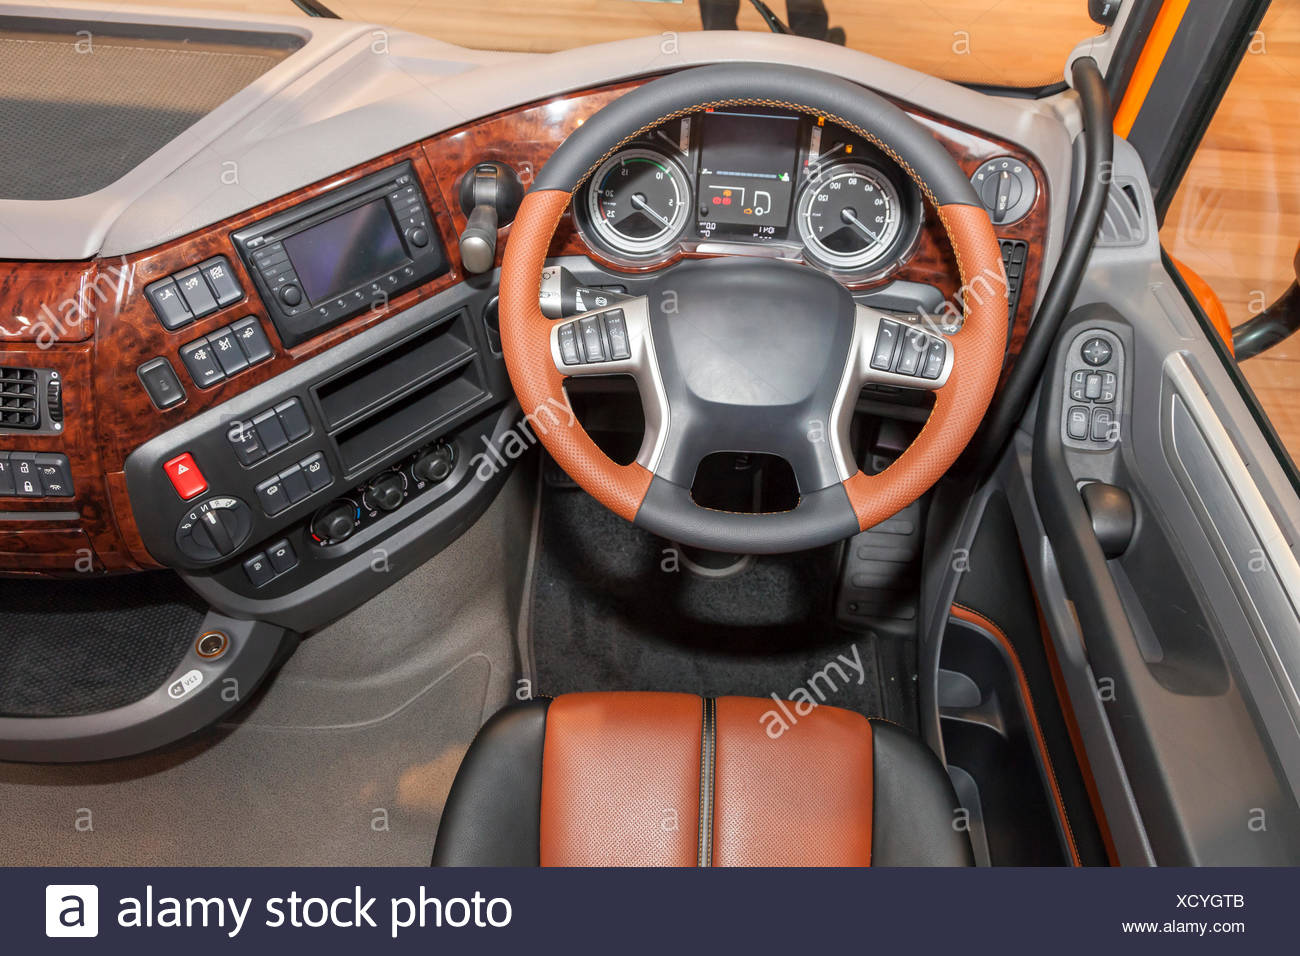 Dashboard Of A Modern Truck With A Luxury Interior Stock